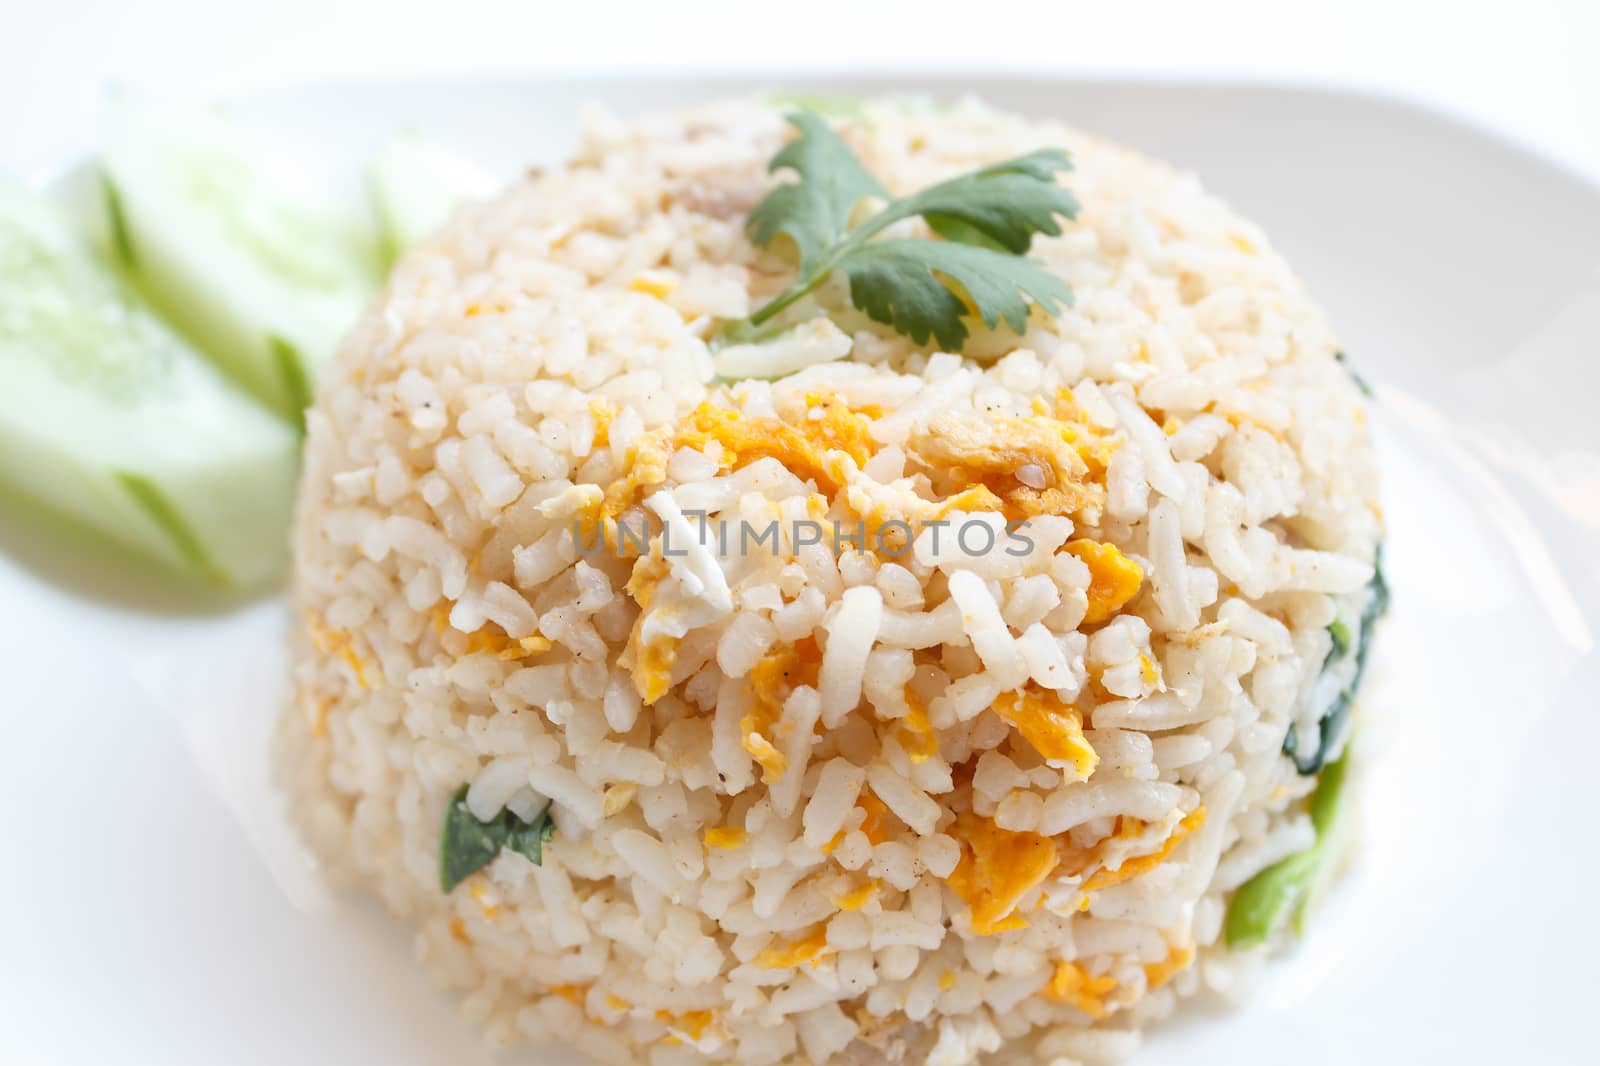 fried rice with pork and cucumber garnish in Asia